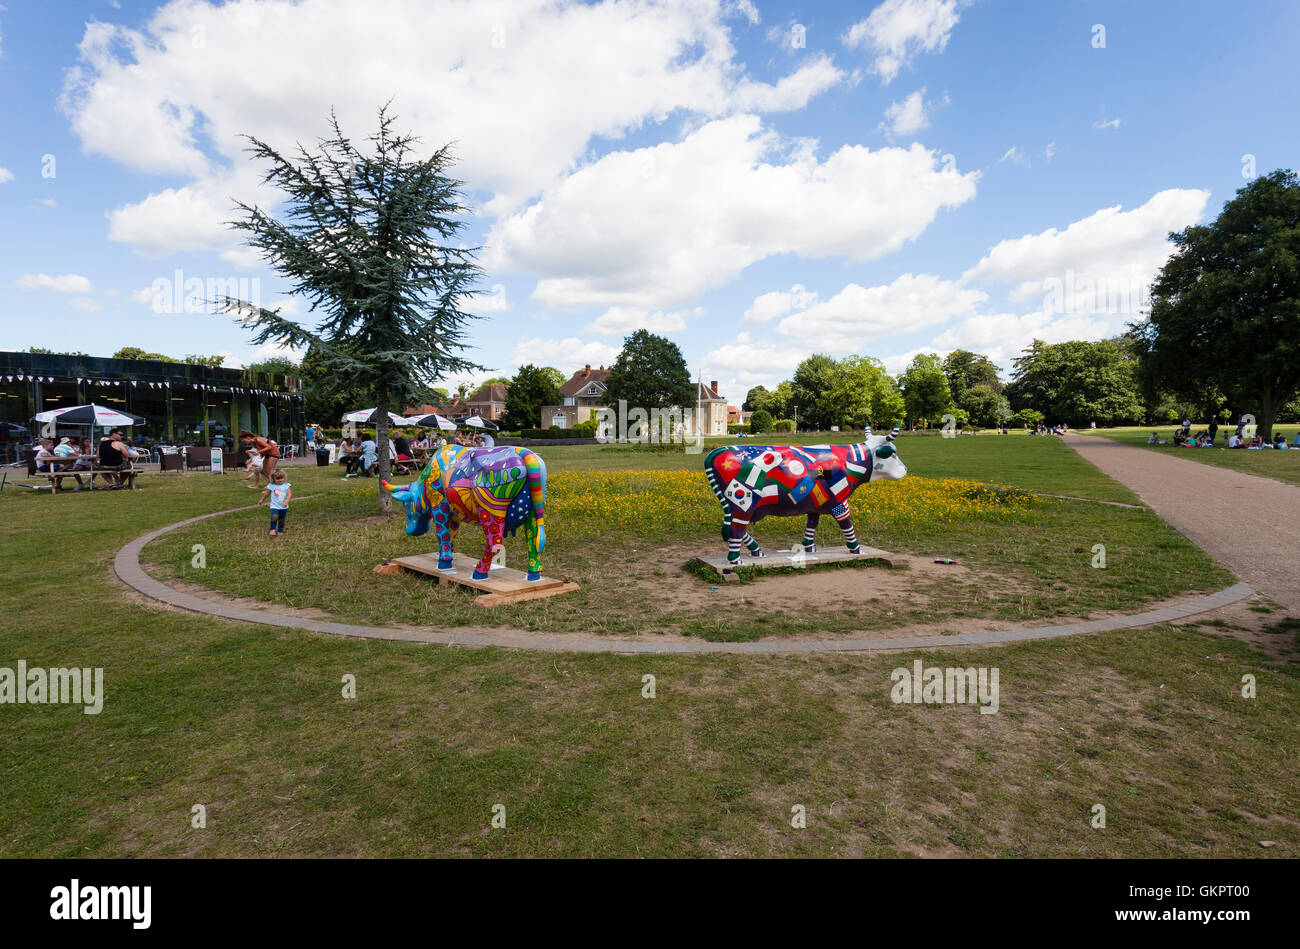 Priory Park, Reigate, Surrey, UK on a sunny summer's day Stock Photo